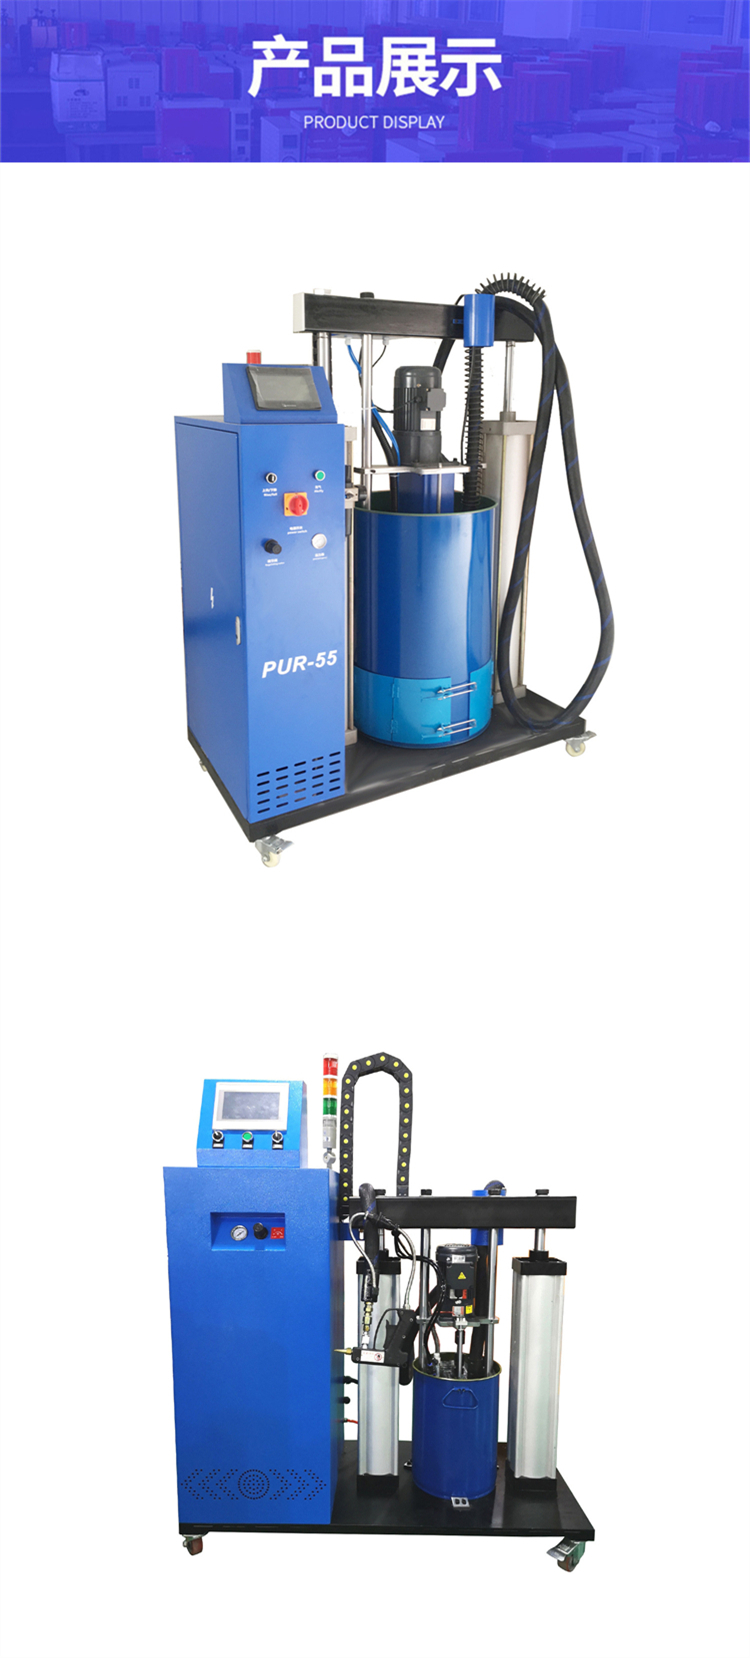 Supply of gear pump type 10L hot melt adhesive equipment, dispensing and spraying machine, fully automatic hot melt adhesive machine